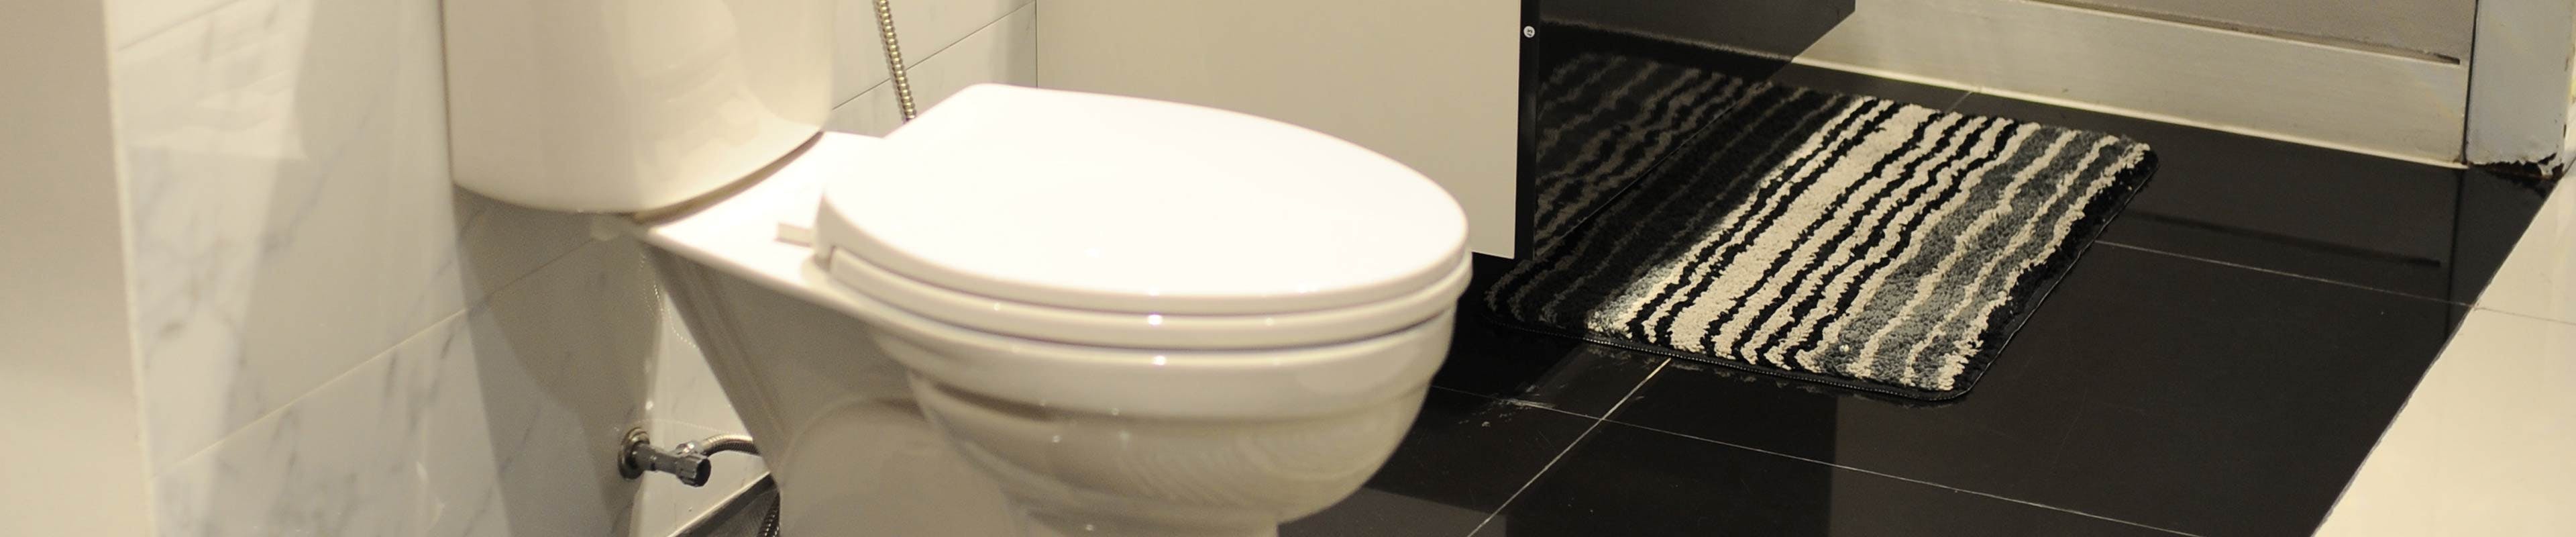 A well-maintained toilet in a home.